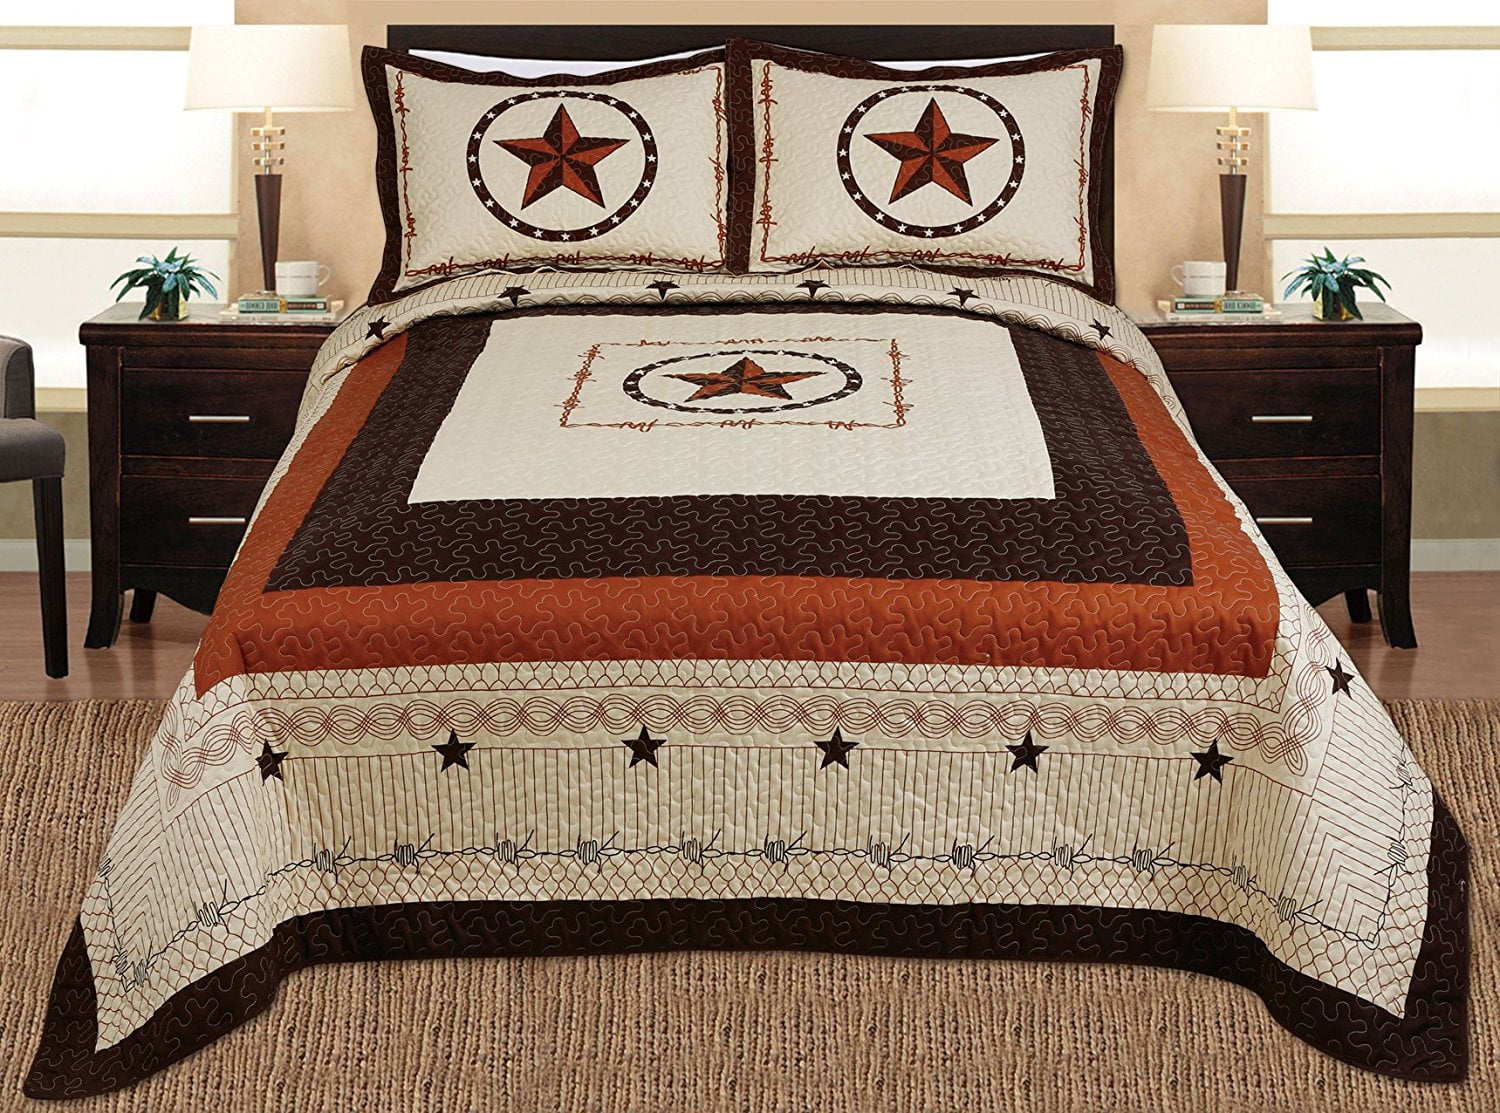 Details about   Rustic Modern Farmhouse Cabin Lodge Quilted Bedspread Coverlet Bedding Set with